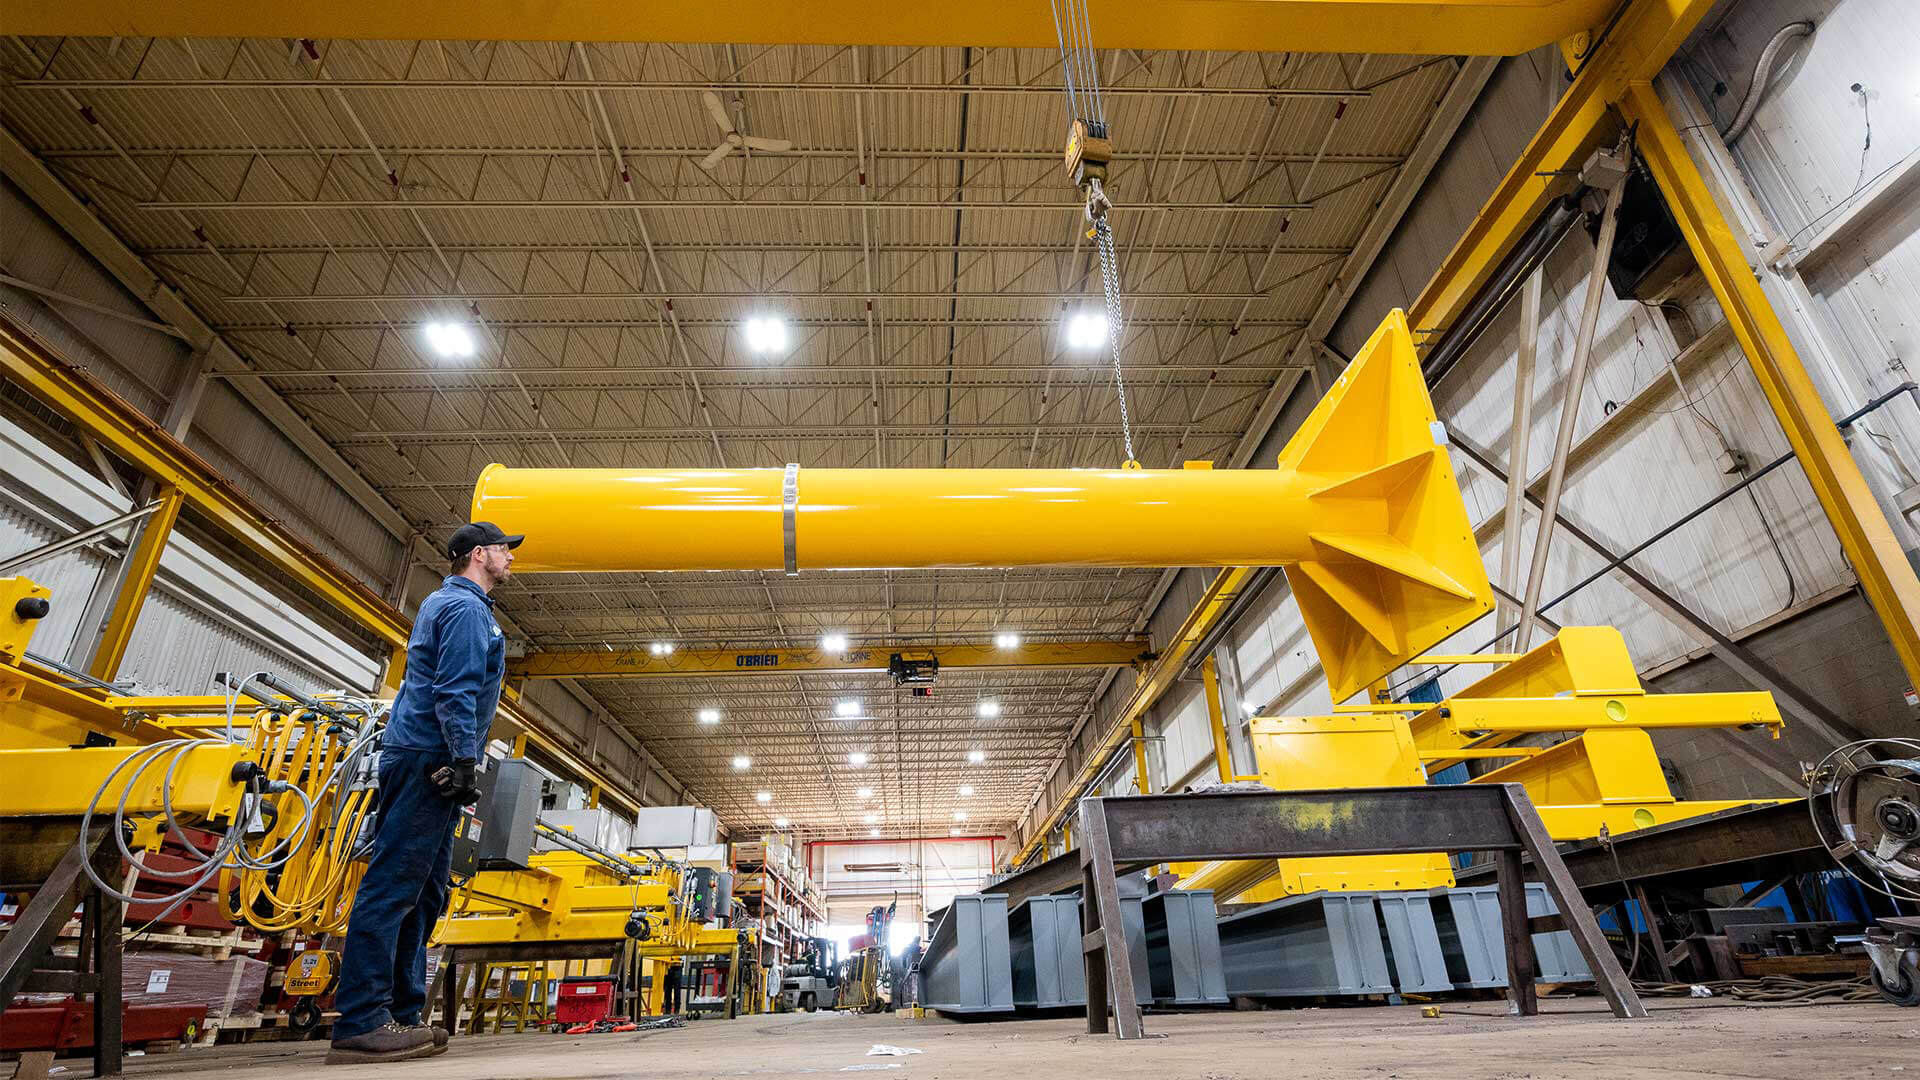 Jib Cranes – Durable and Versatile for Light to Heavy-Duty Lifting